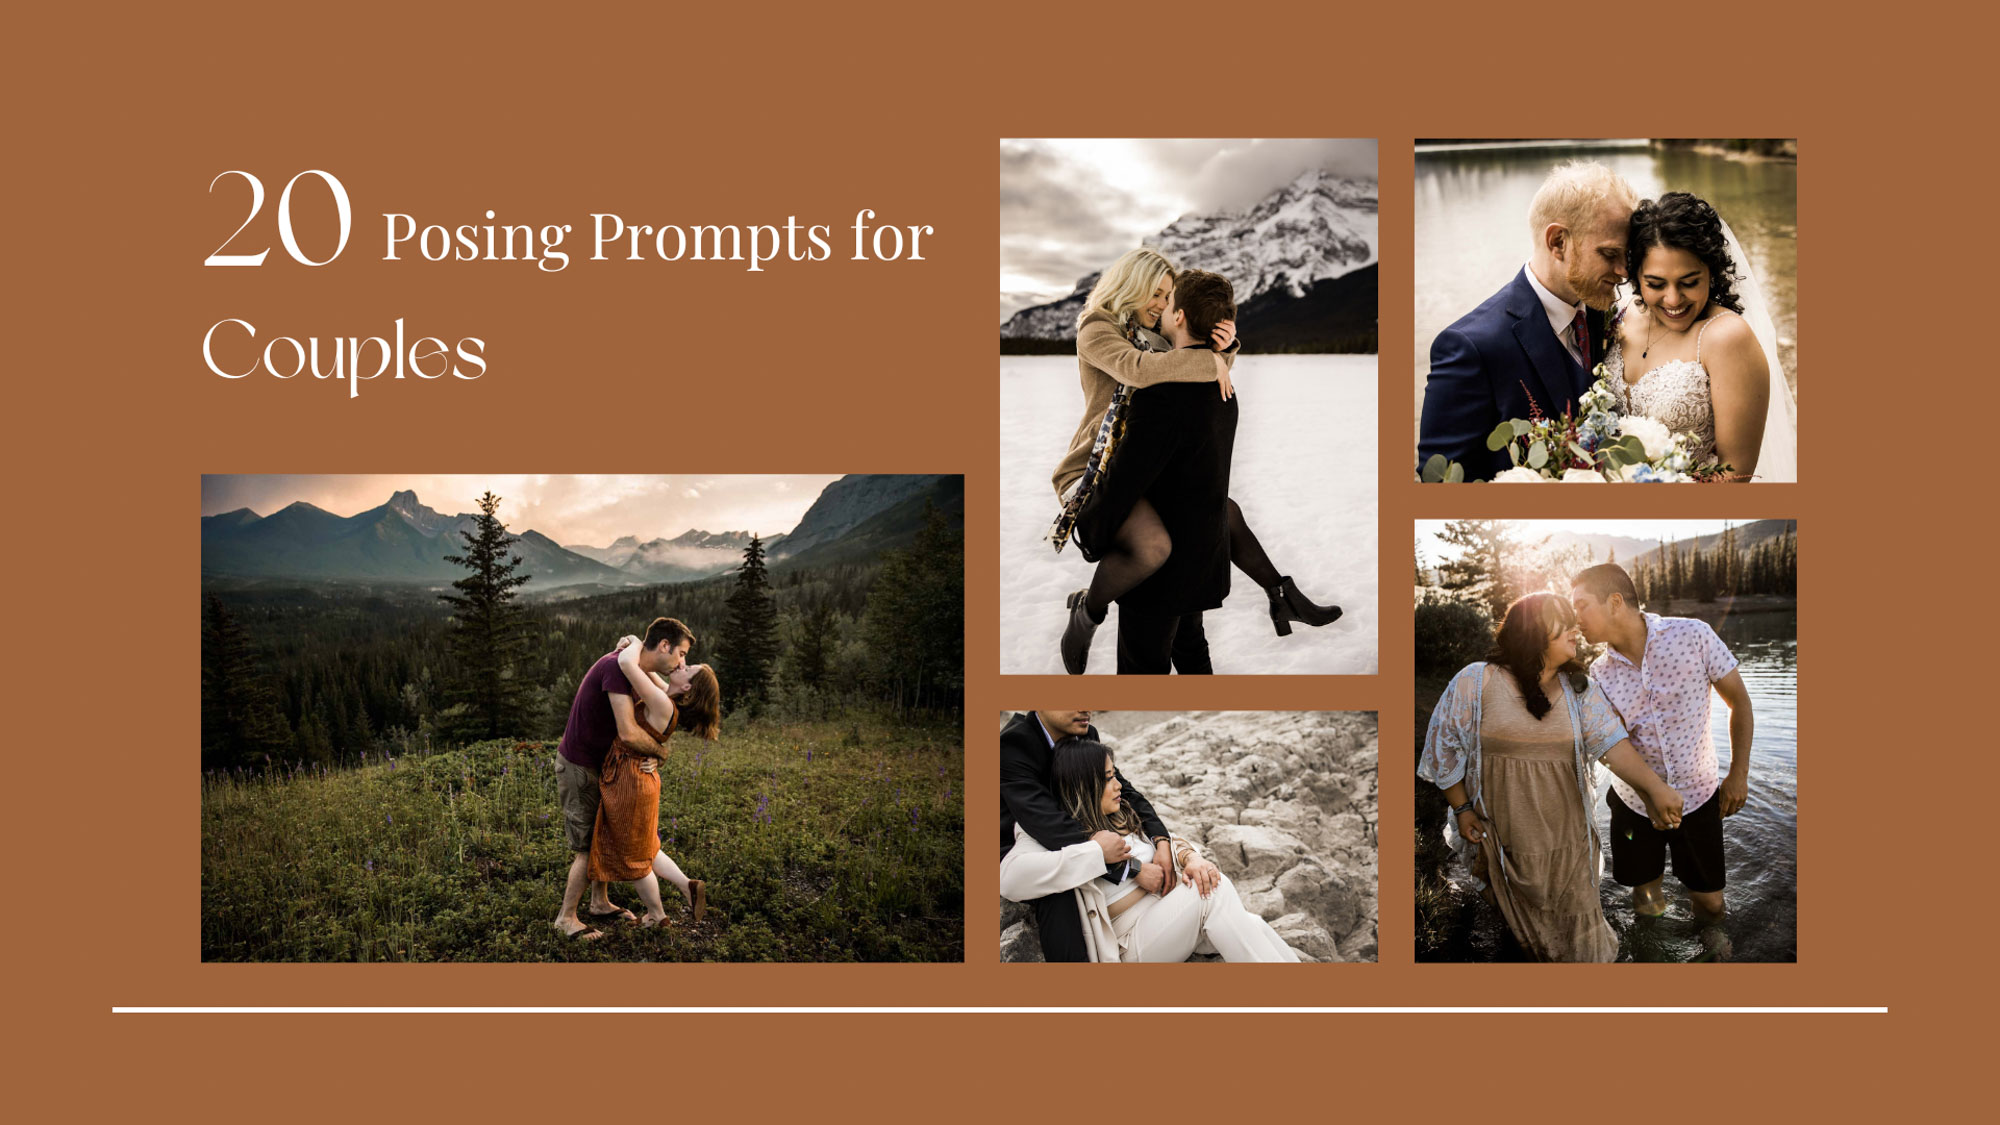 Posing prompts for couples, engagement, wedding photography, couple being posed by photographer during engagement or wedding photos